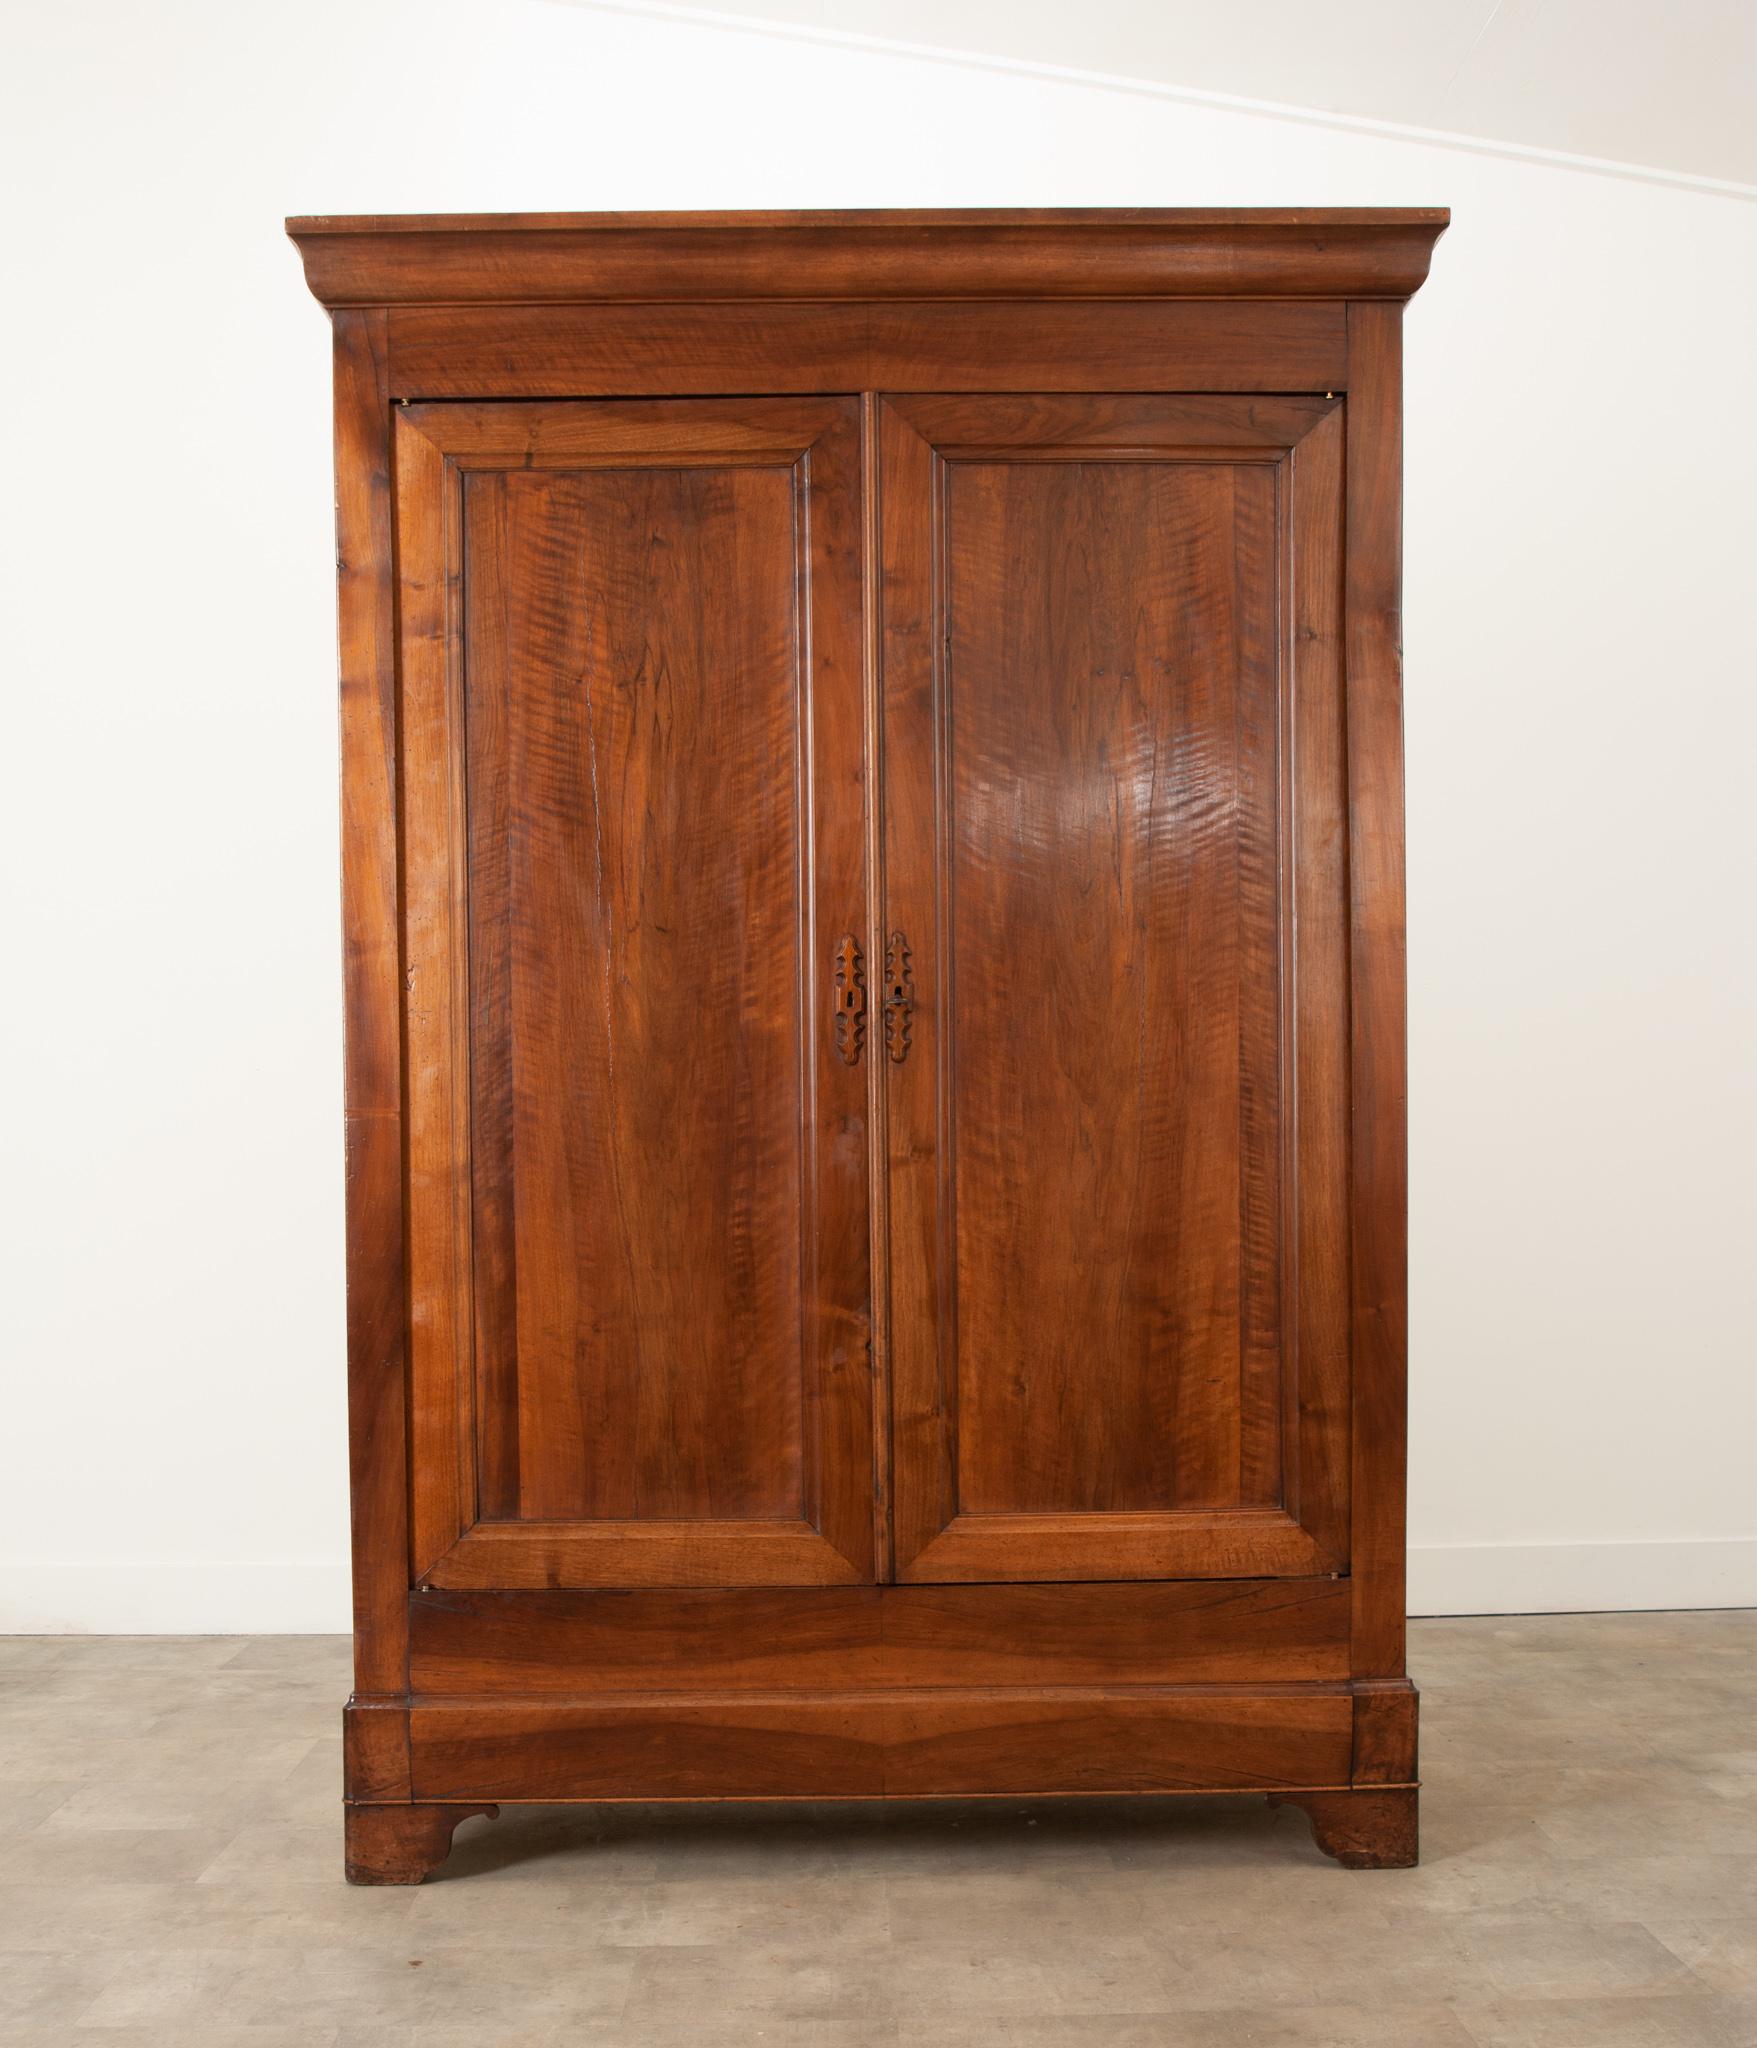 A handsome 19th century walnut armoire, made in France in the Louis Philippe style. This tall case piece has a simple, linear composition – an attribute that makes Louis Philippe pieces ideal for their versatility and placement possibilities. This